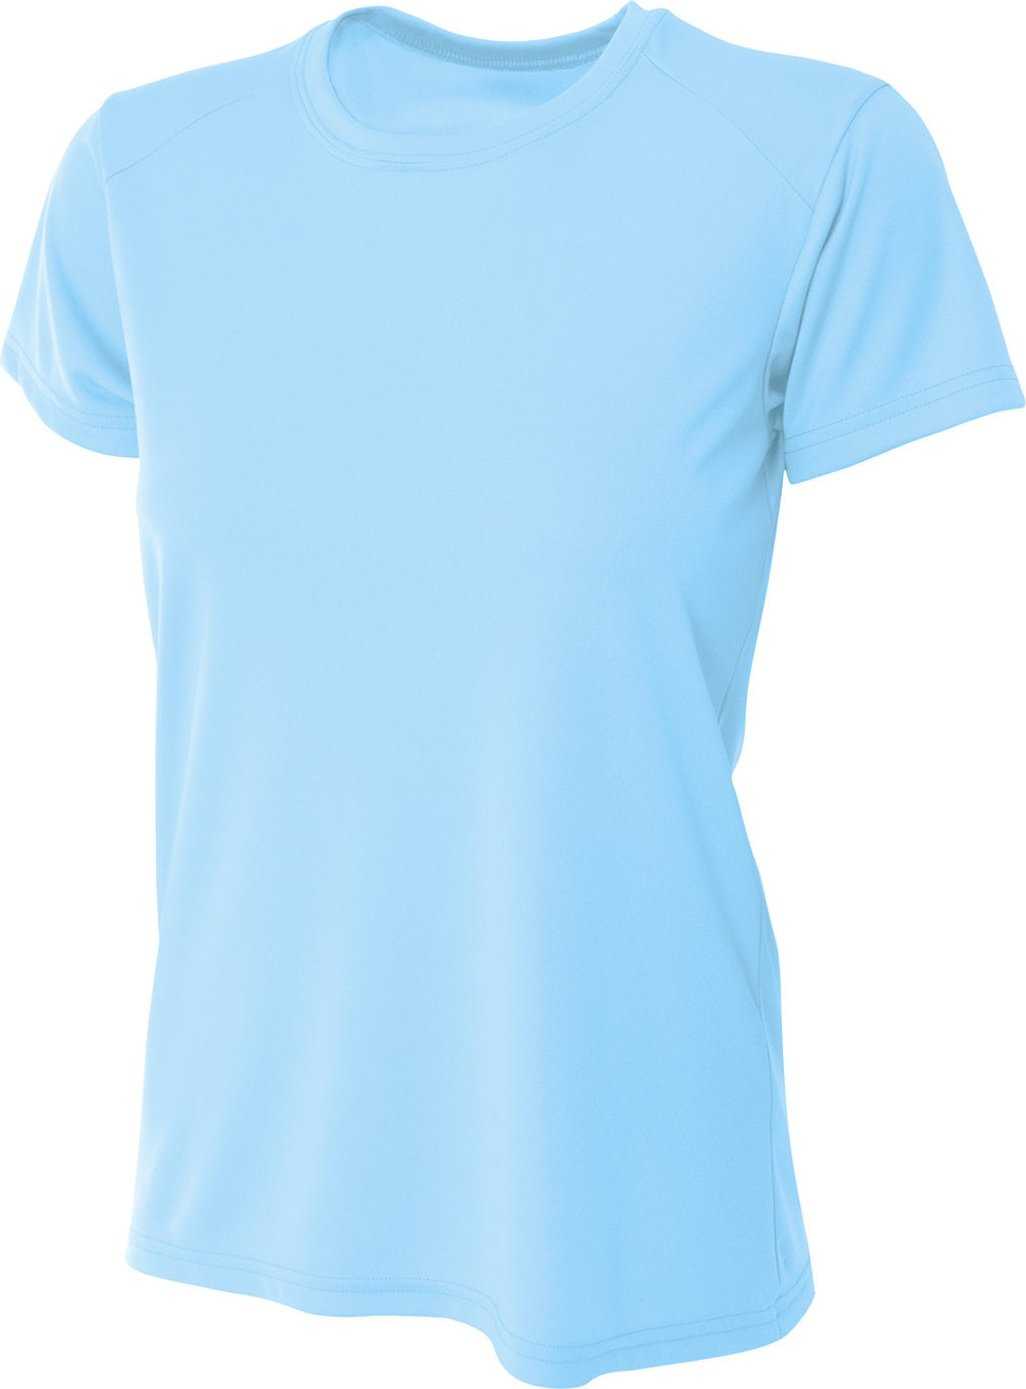 A4 NW3201 Ladies' Cooling Performance T-Shirt - SKY BLUE - HIT a Double - 2